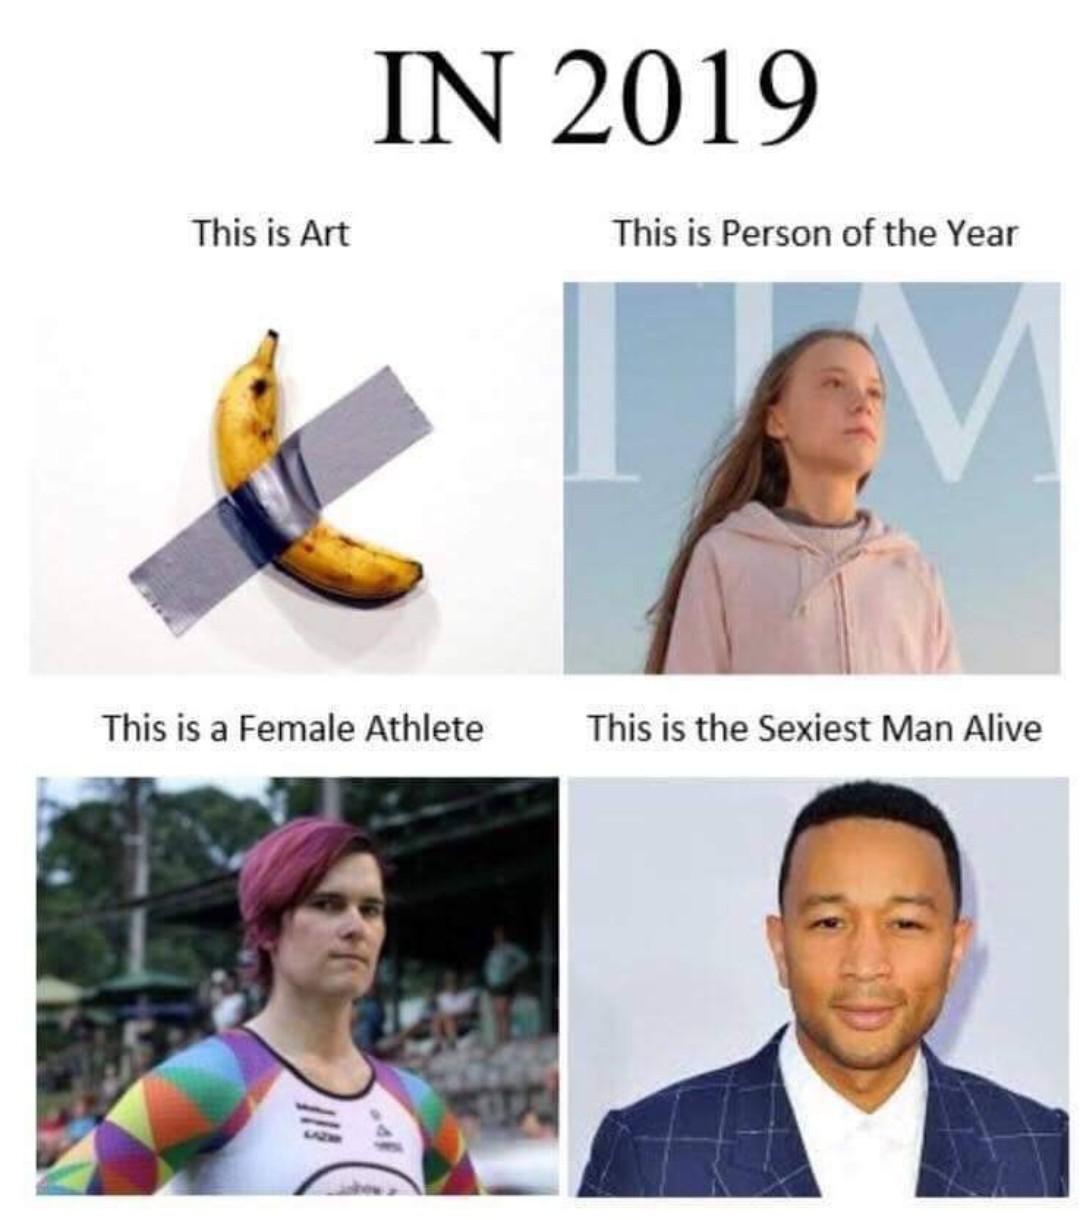 person of the year 2019 meme - In 2019 This is Art This is Person of the Year This is a Female Athlete This is the Sexiest Man Alive